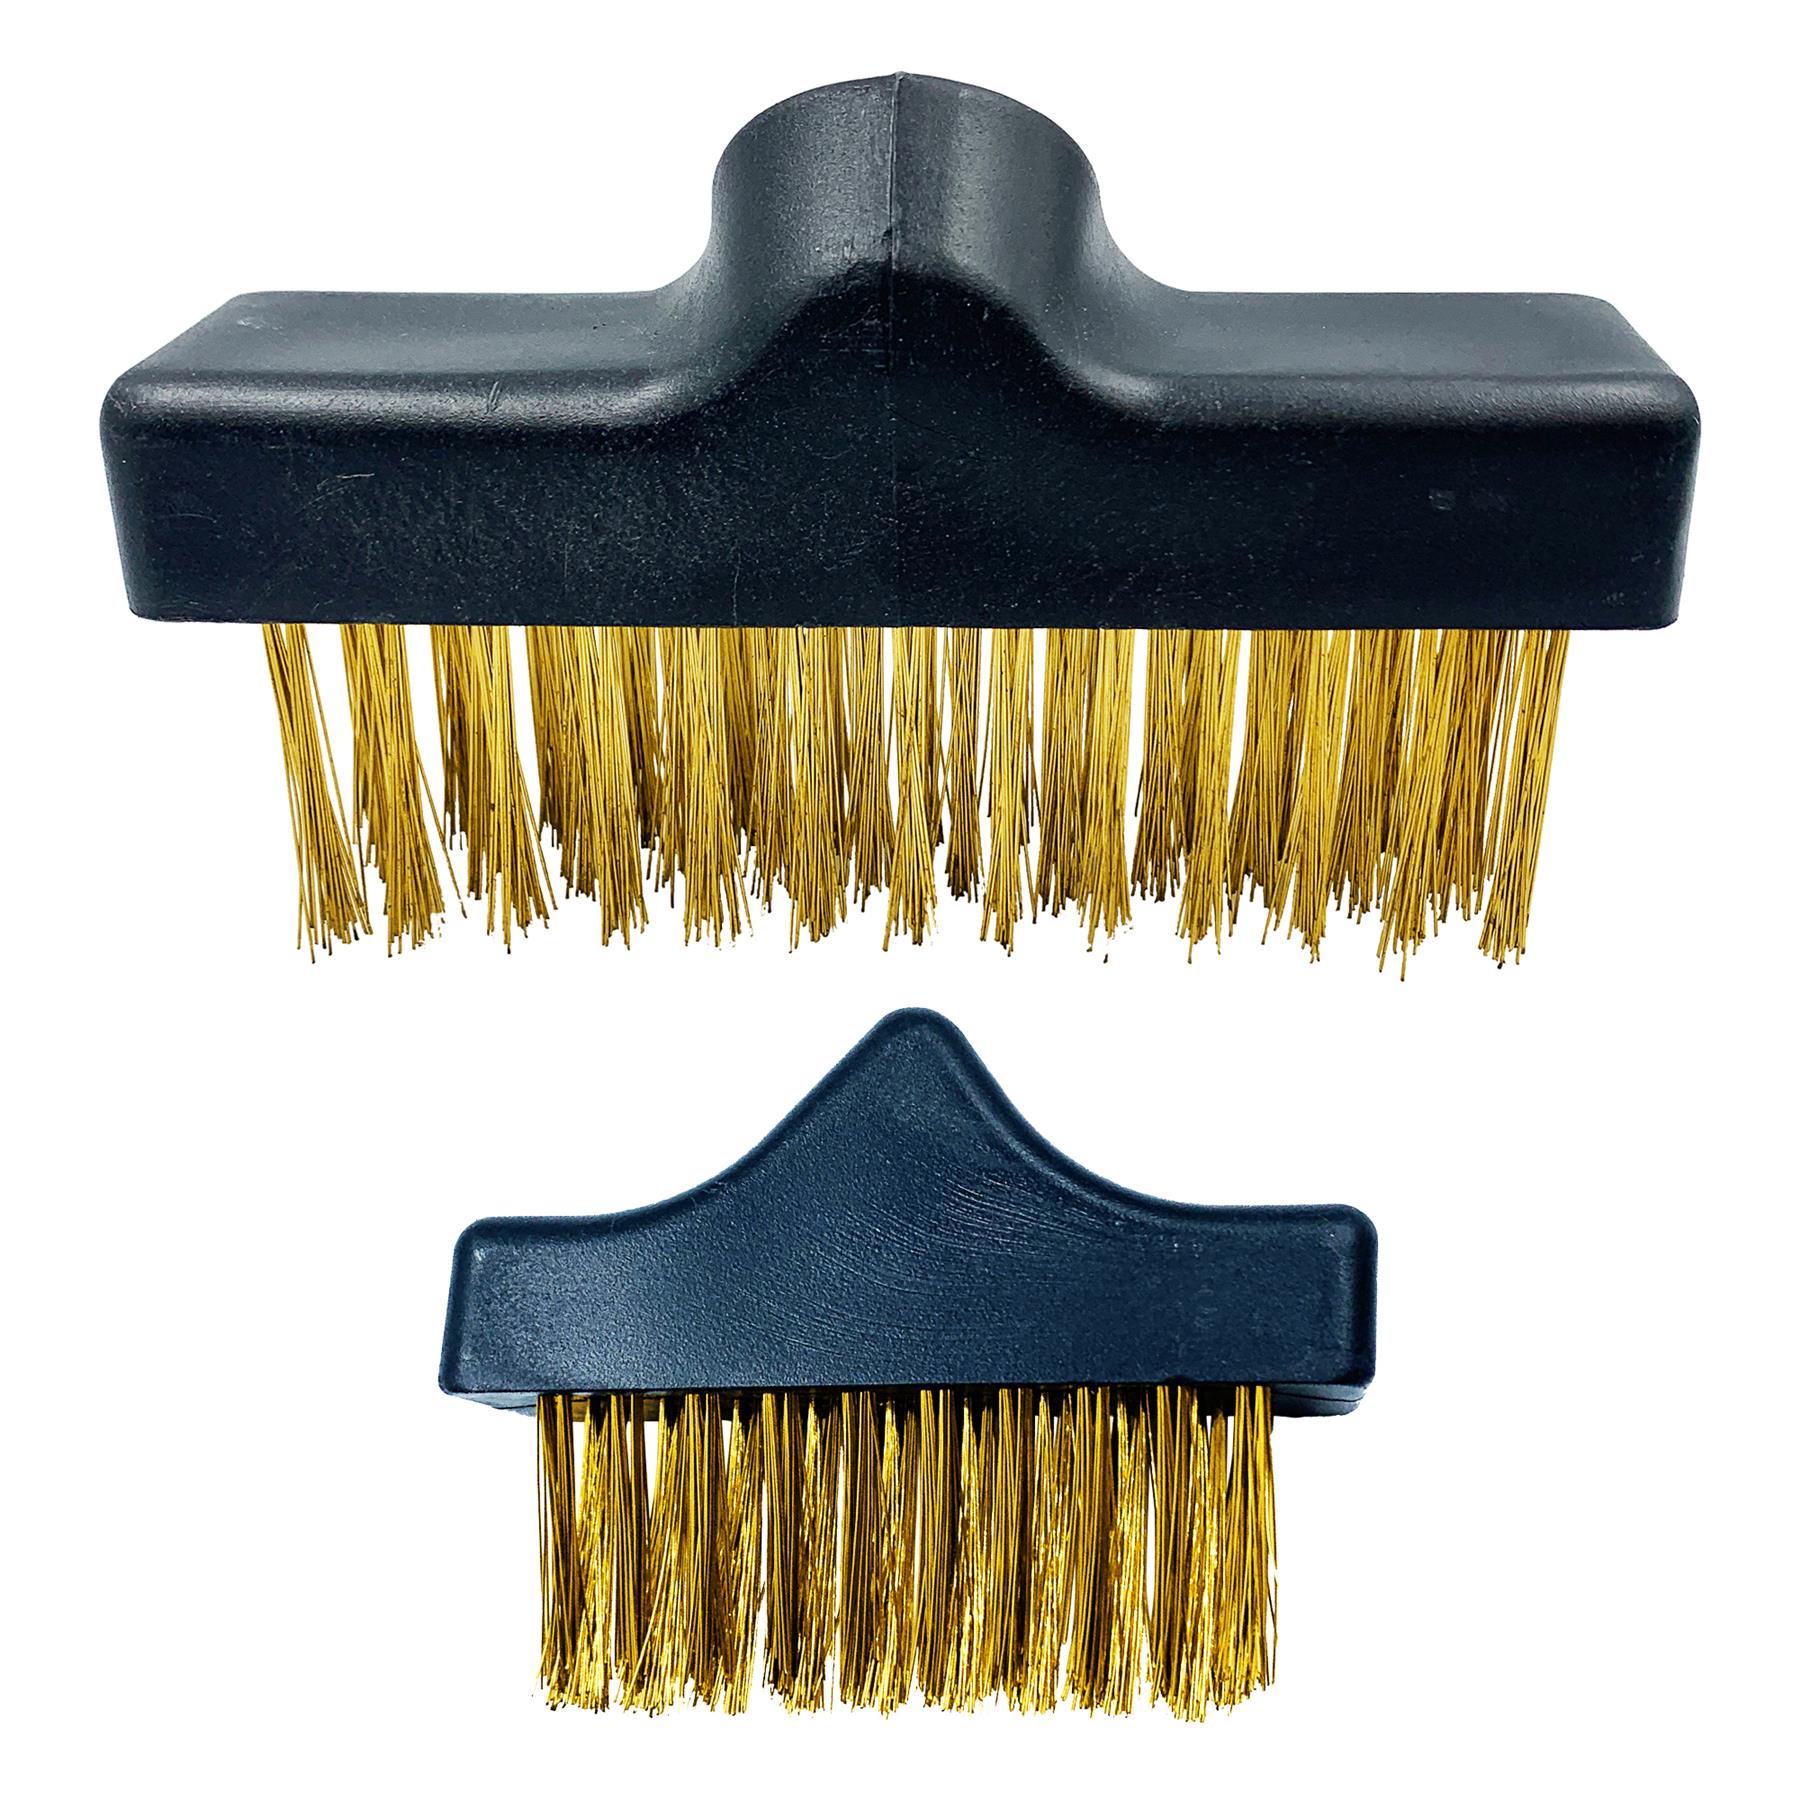 Replacement Brush Heads - Black Weed Wire Brush & Decking Head Set